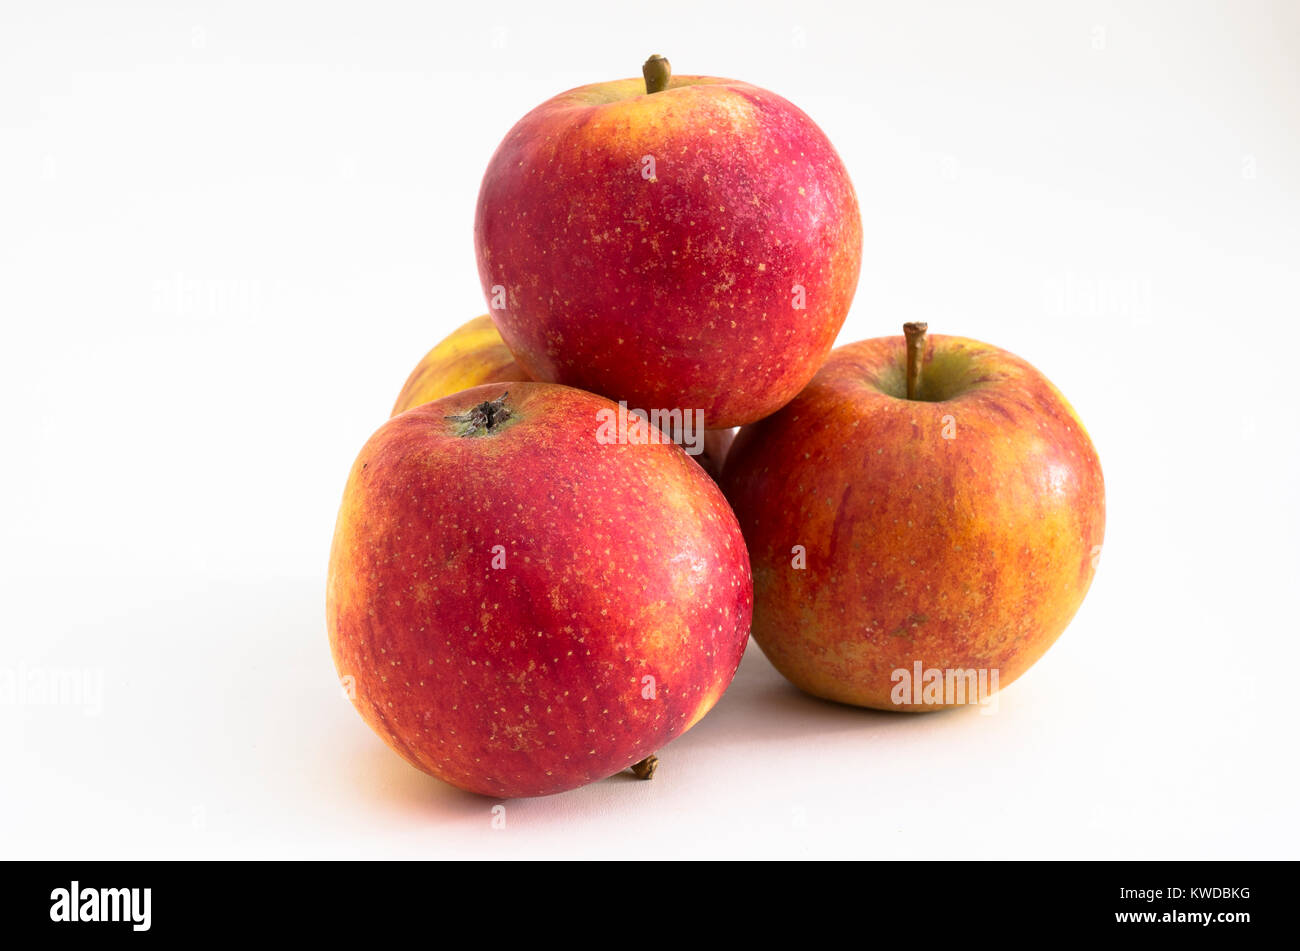 Ripe English eating apples Malus domestica WINTER WONDER ready for eating mid-winter in UK Stock Photo